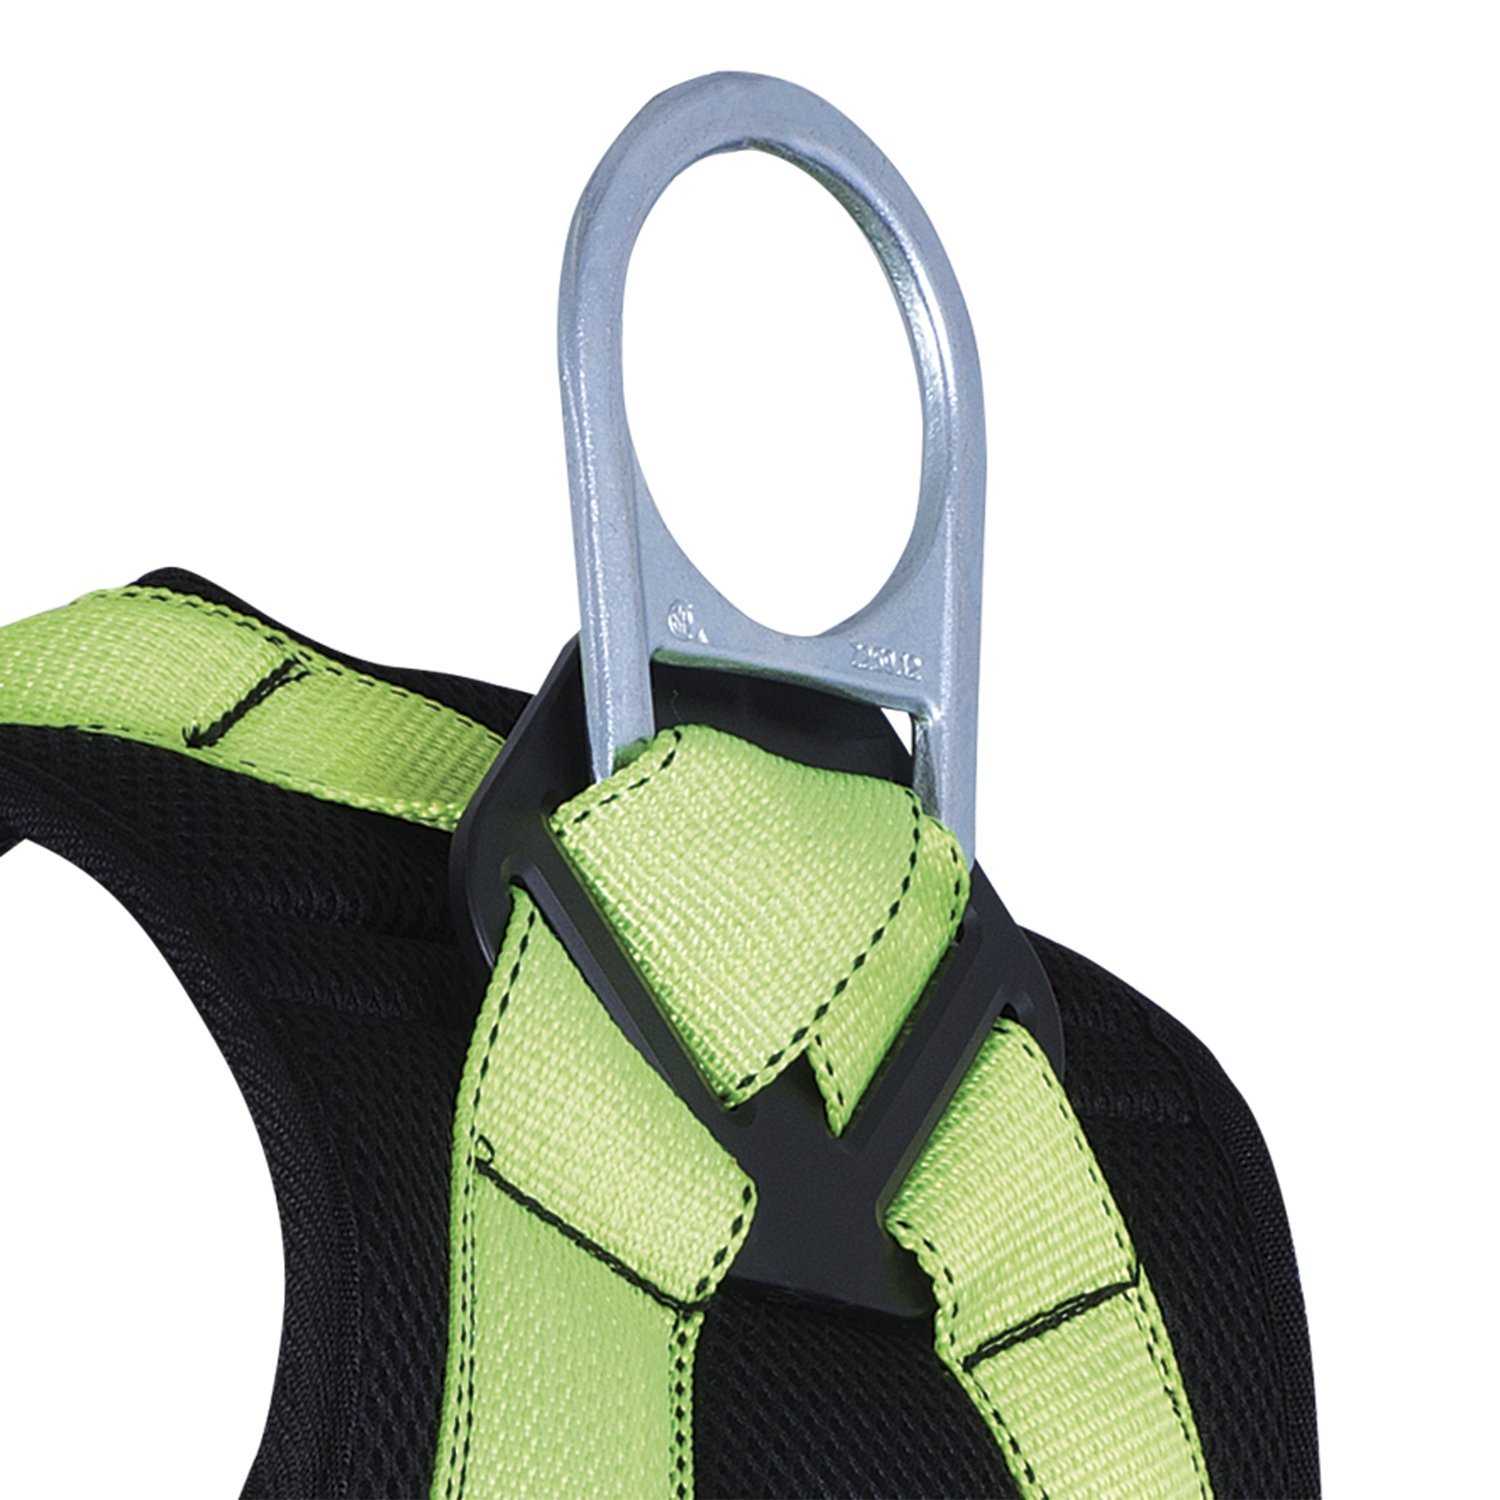 Peakworks Fall Protection Full Body Padded Safety Harness with Back Support, 5-Point Adjustment, Fall Indicator, Back D-Ring, Stab Lock Buckles, Hi Vis Green/Black, Universal Fit, V8006100, 3.5 lbs